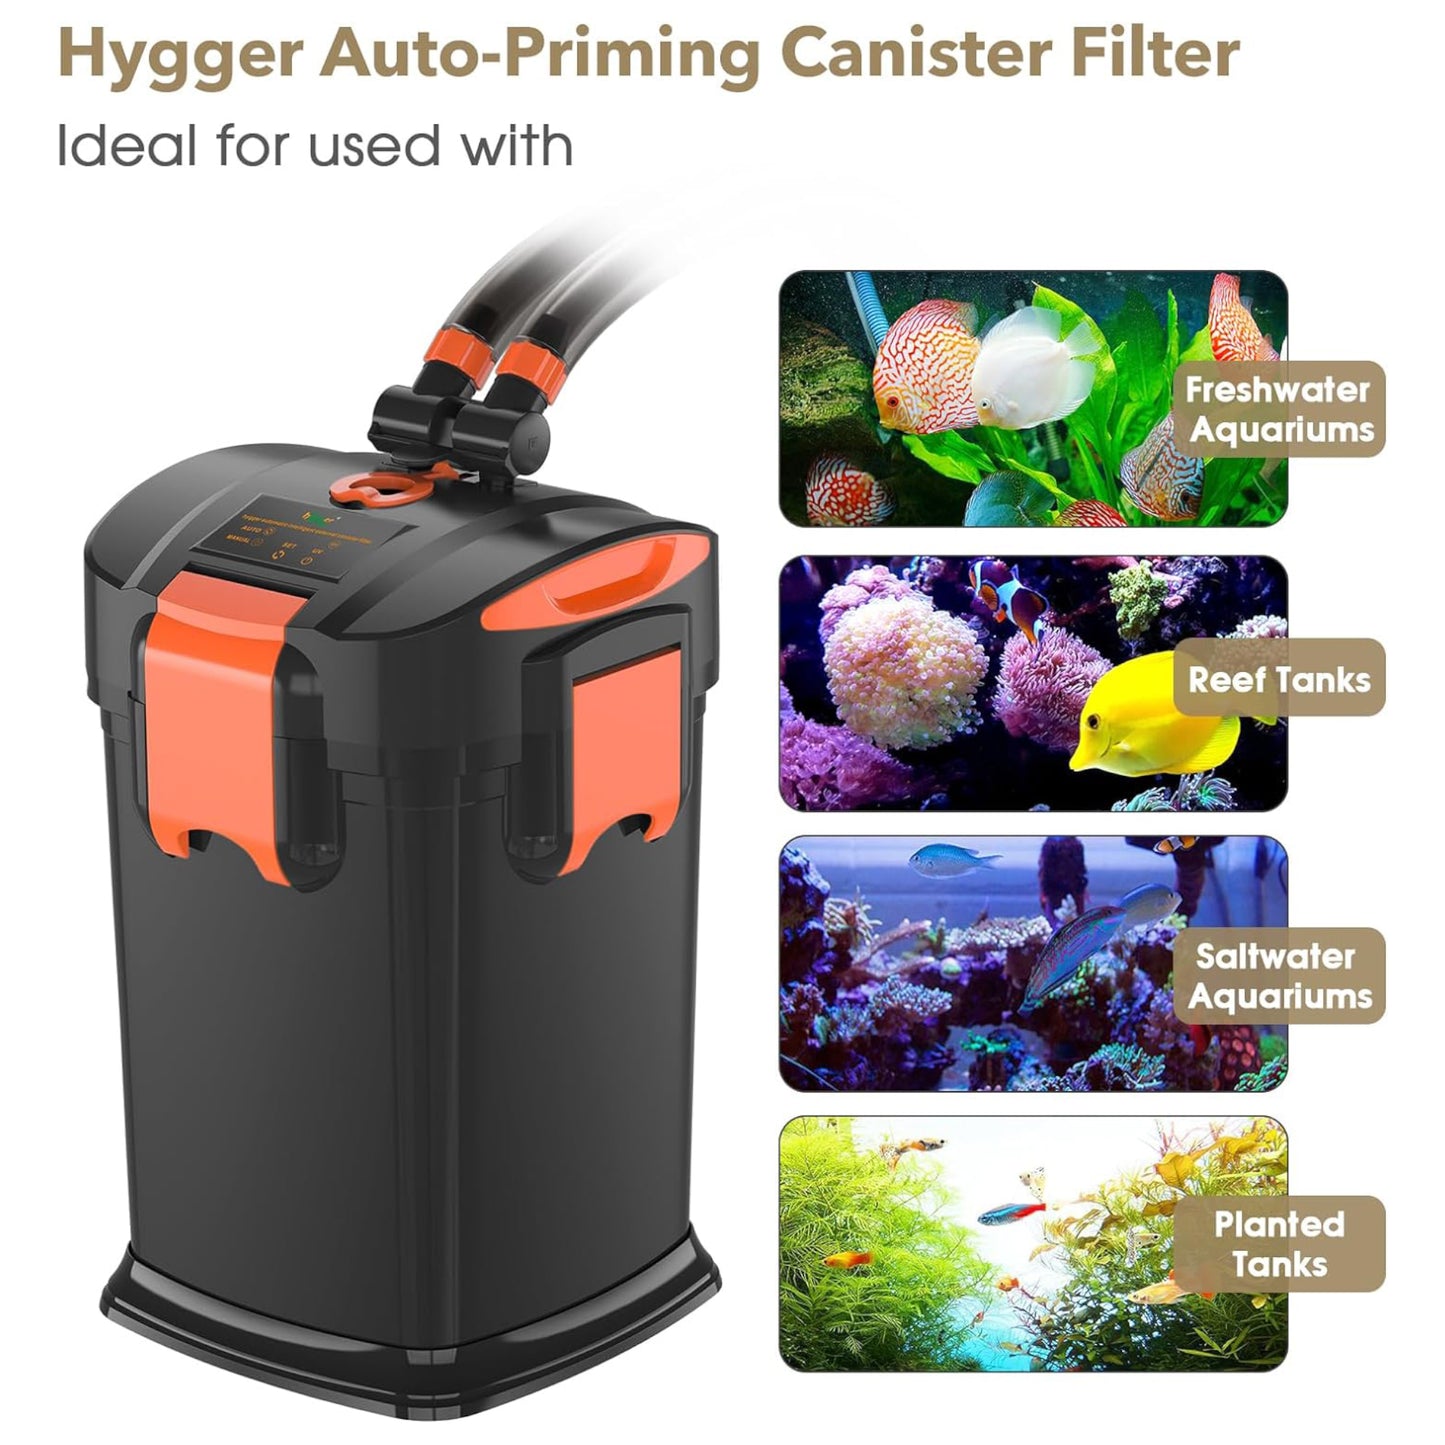 Hygger Ultra-Quiet Canister Filter with UV Sterilizer 2200L